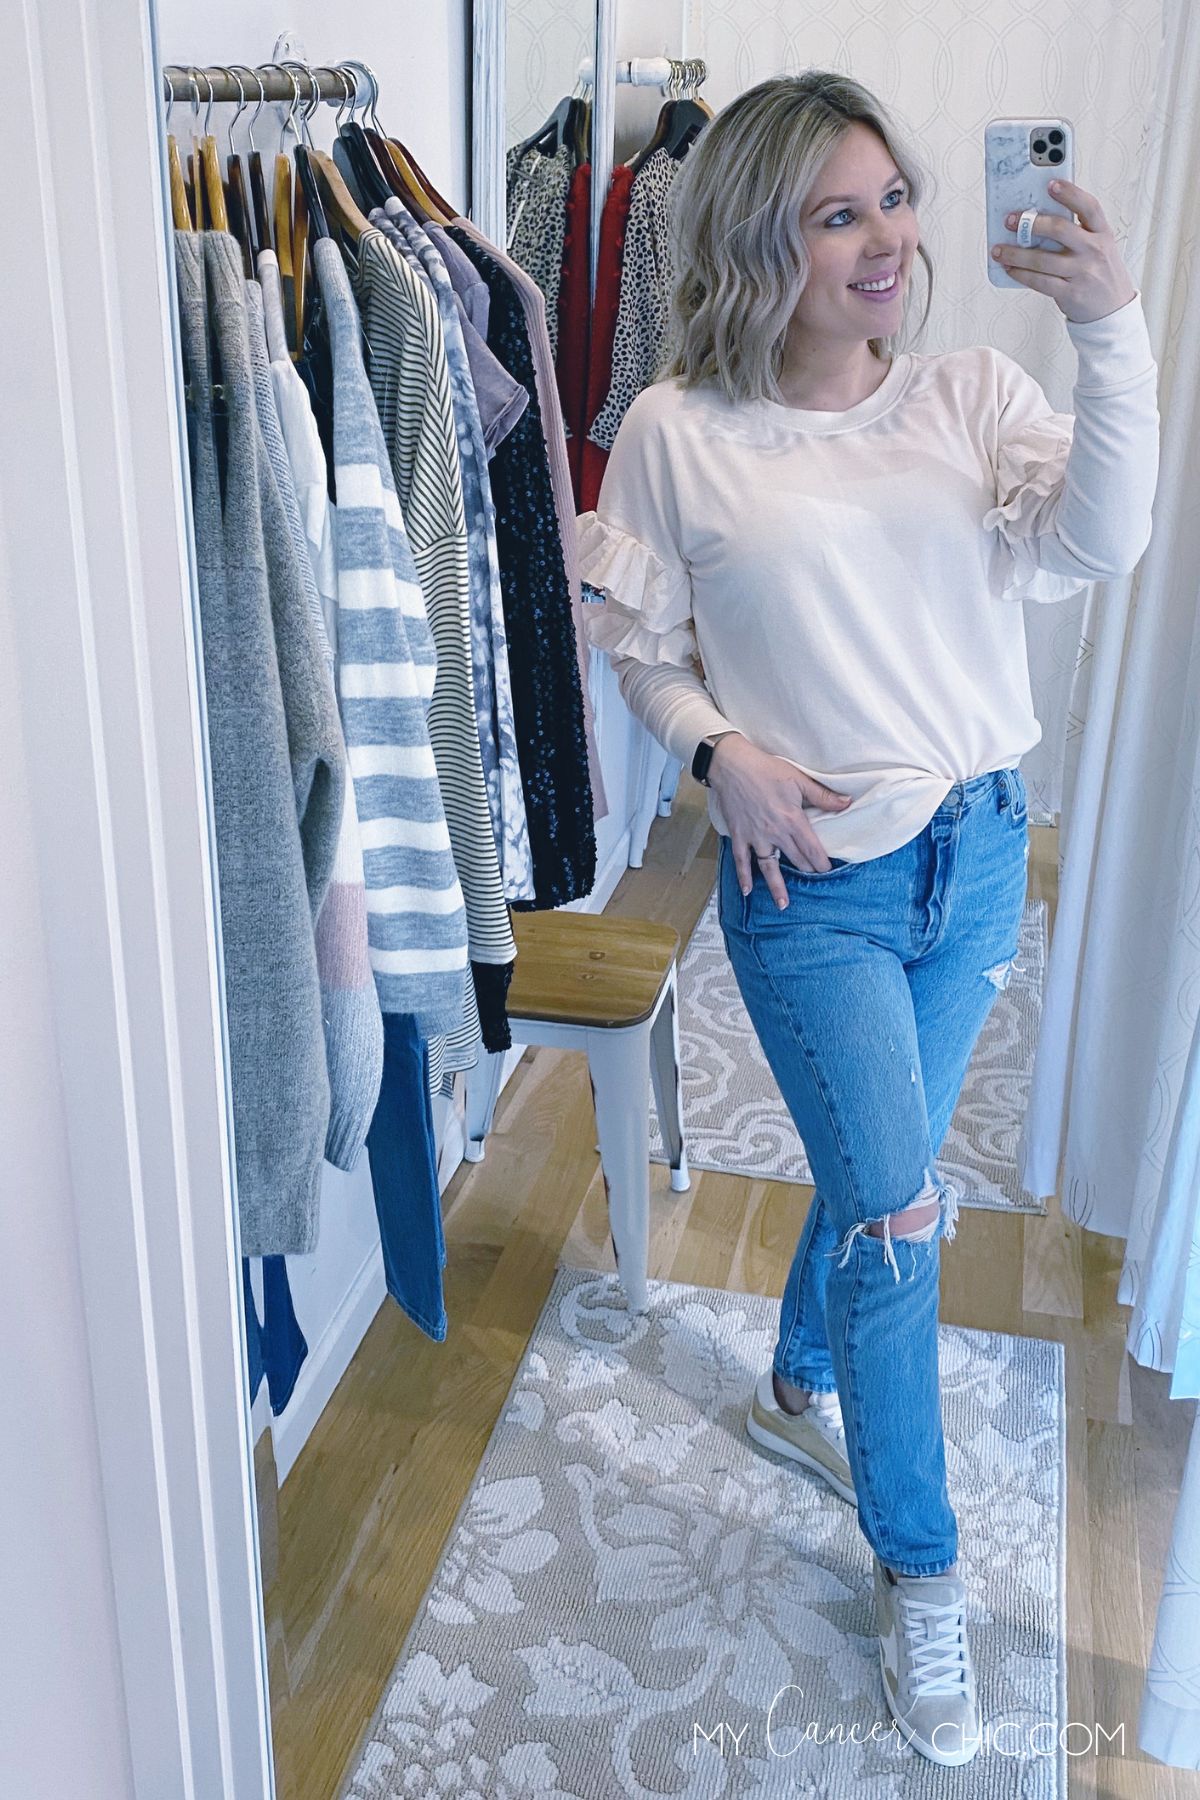 How I Changed My Wardrobe After Breast Cancer - My Cancer Chic